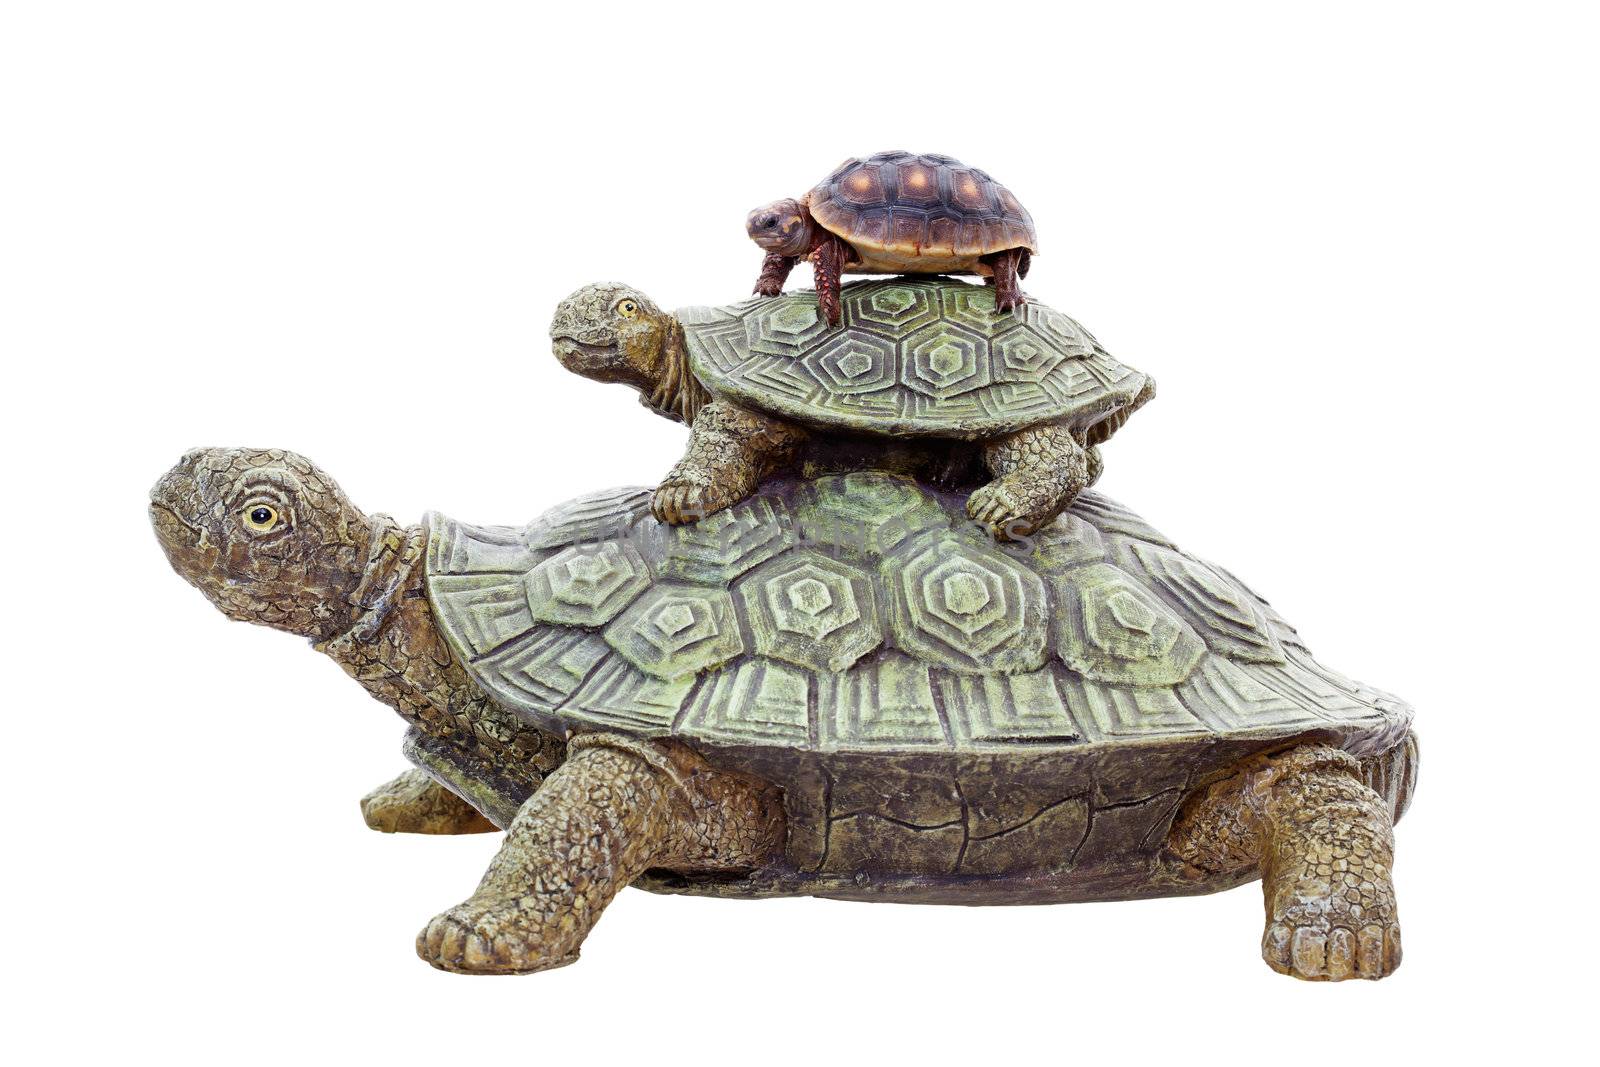 A 4 year-old tortoise on top of an ornamental stack of turtles.  Shot on white background.